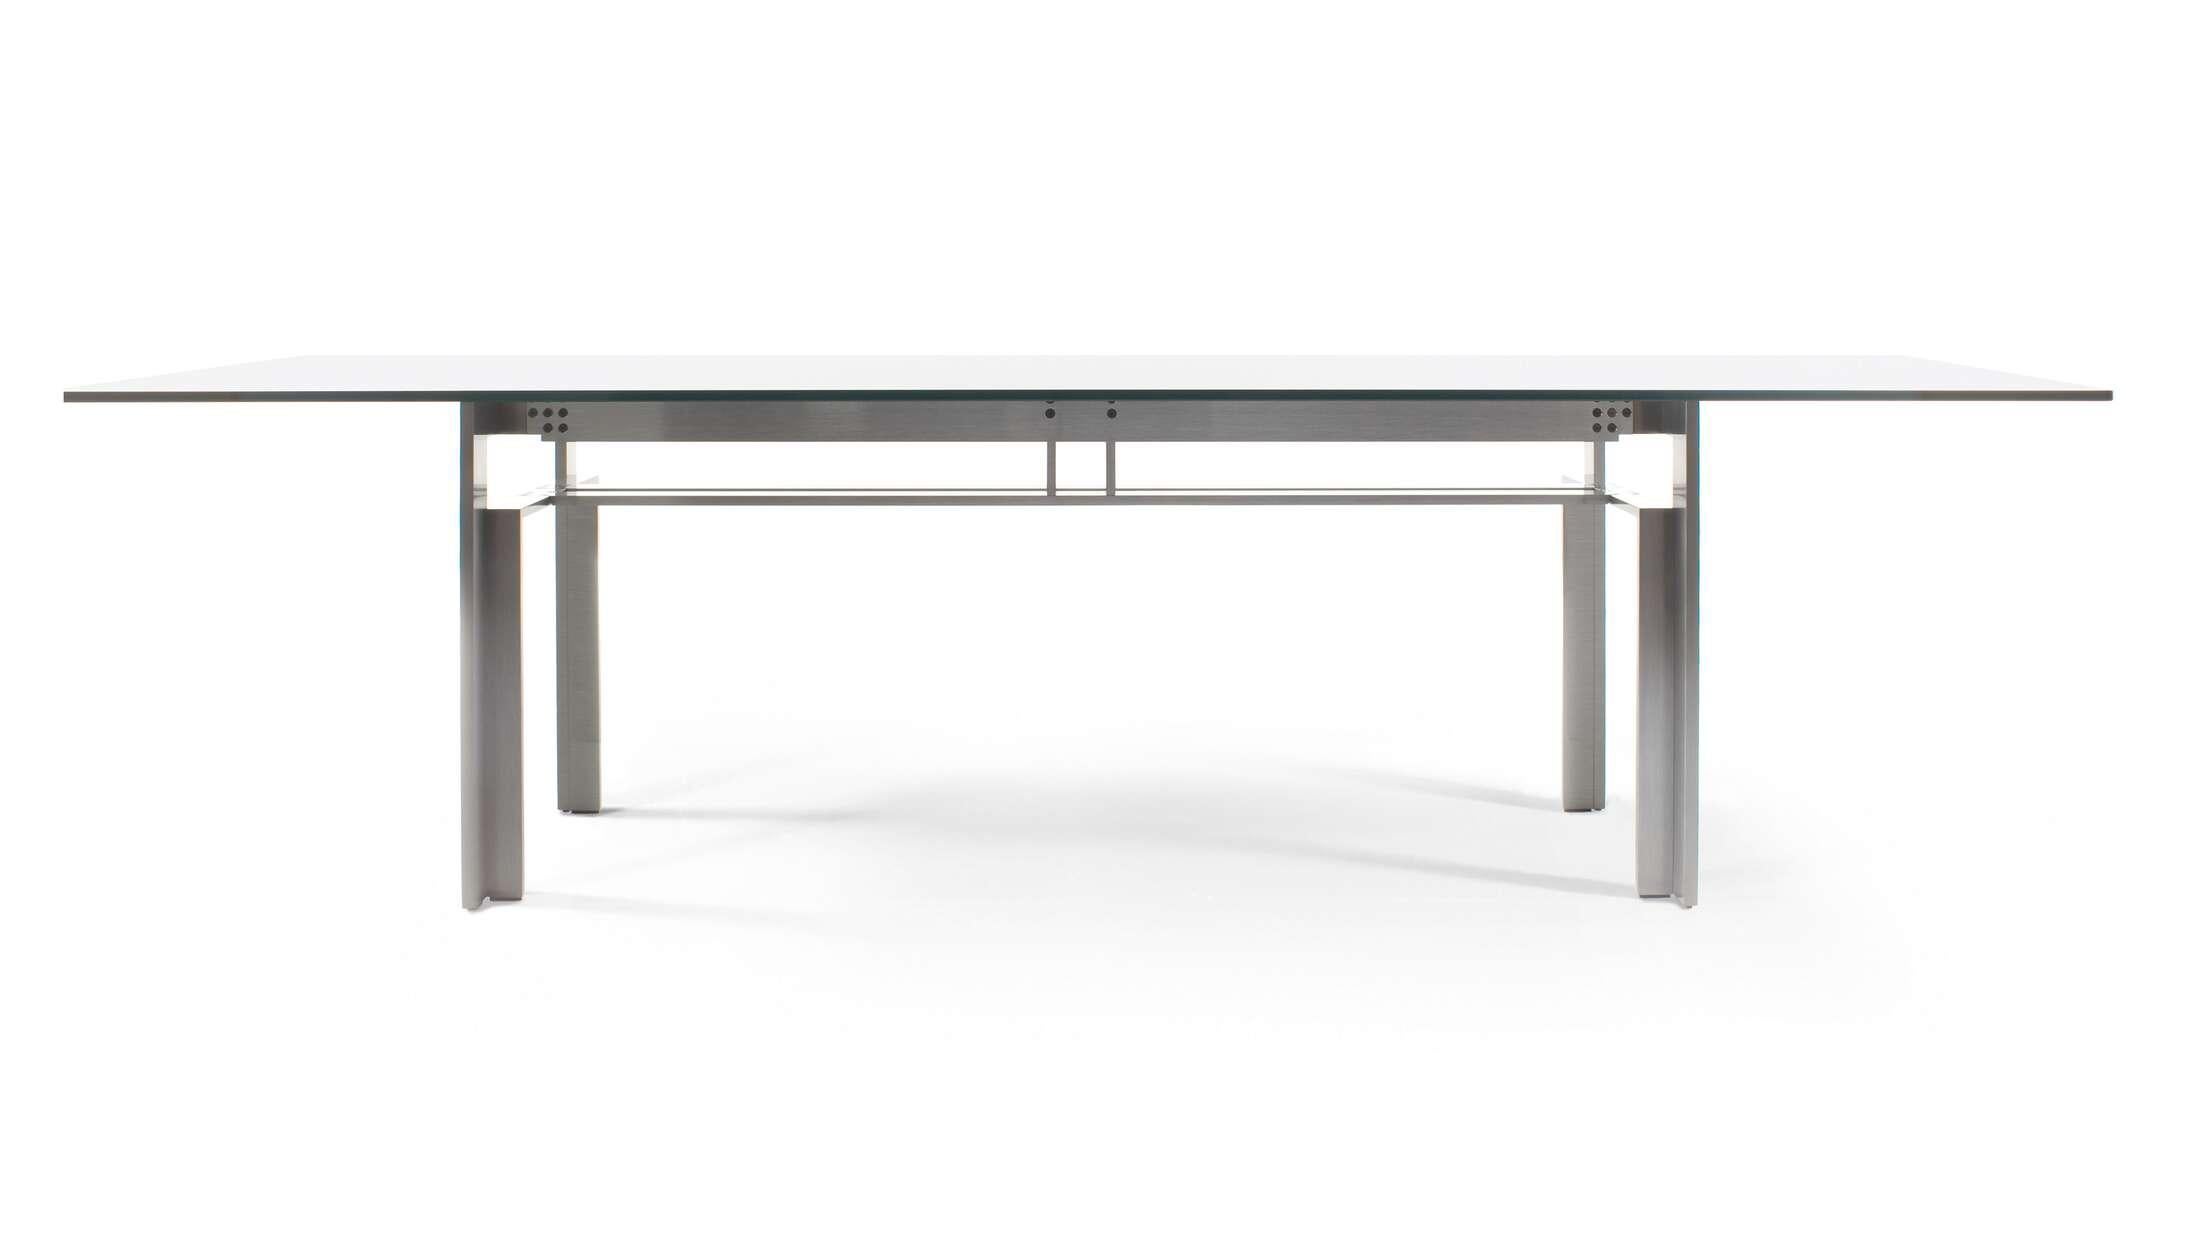 Doge Large Dining Table designed by Carlo Scarpa.
Manufactured by Cassina (Italy)

ULTRARATIONAL EMBLEM
A sculptural structure that has become an emblem of Italian design, a trademark of the new ultrarational movement that in the late 1960s